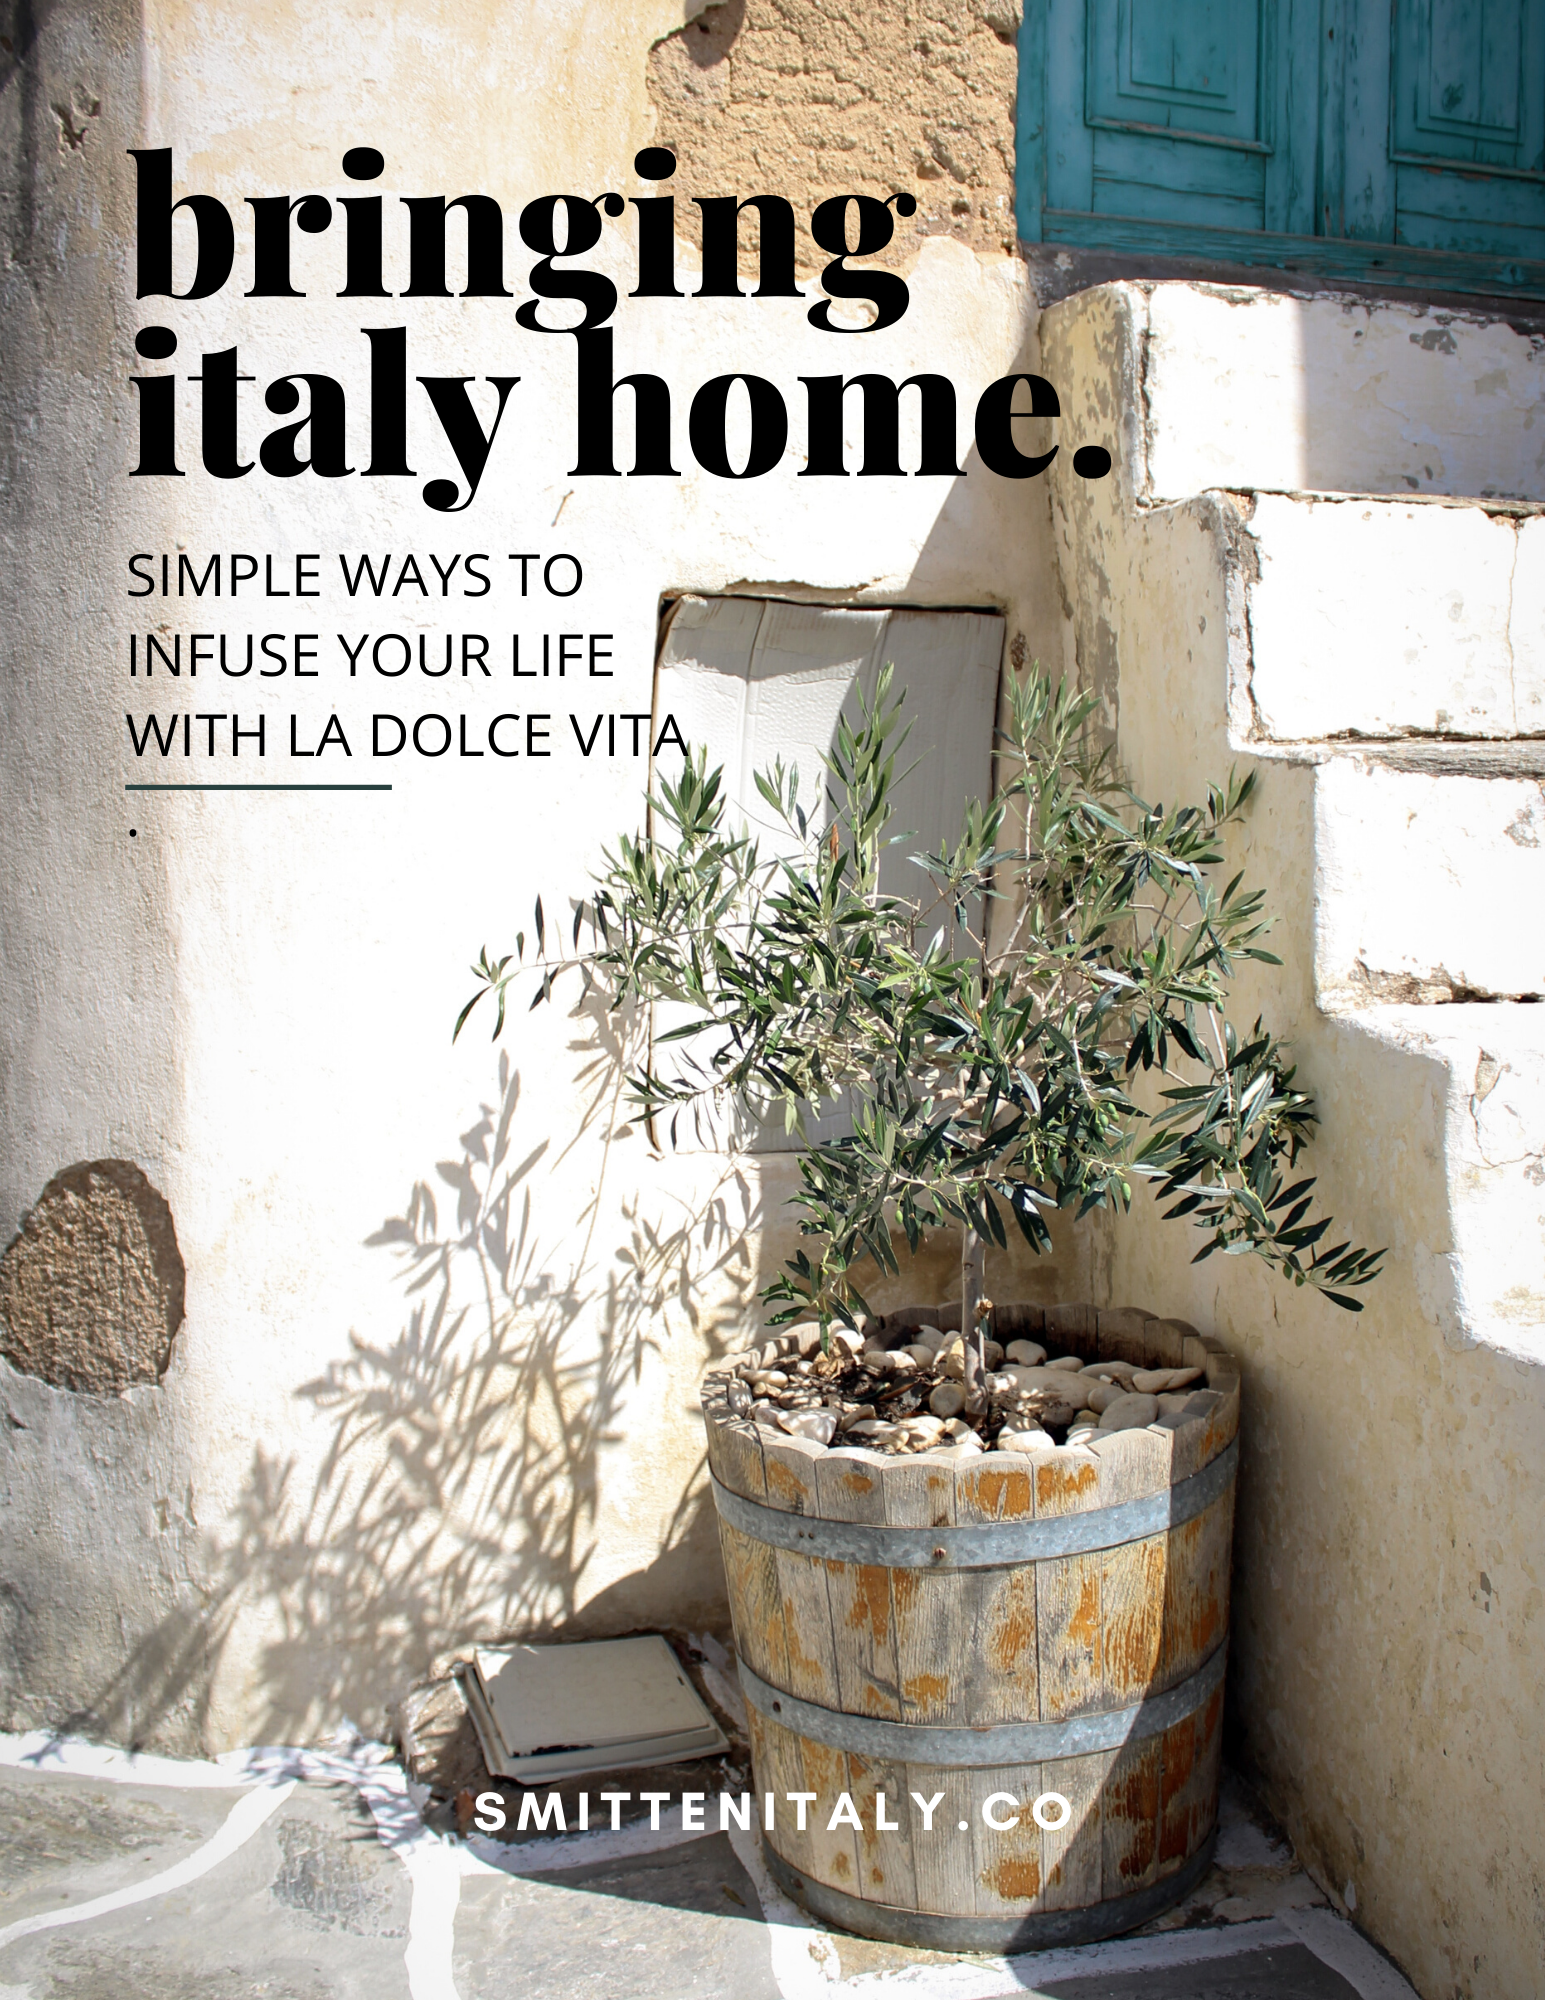 Bringing Italy Home. (simple ideas to live "la dolce vita" at home) 1